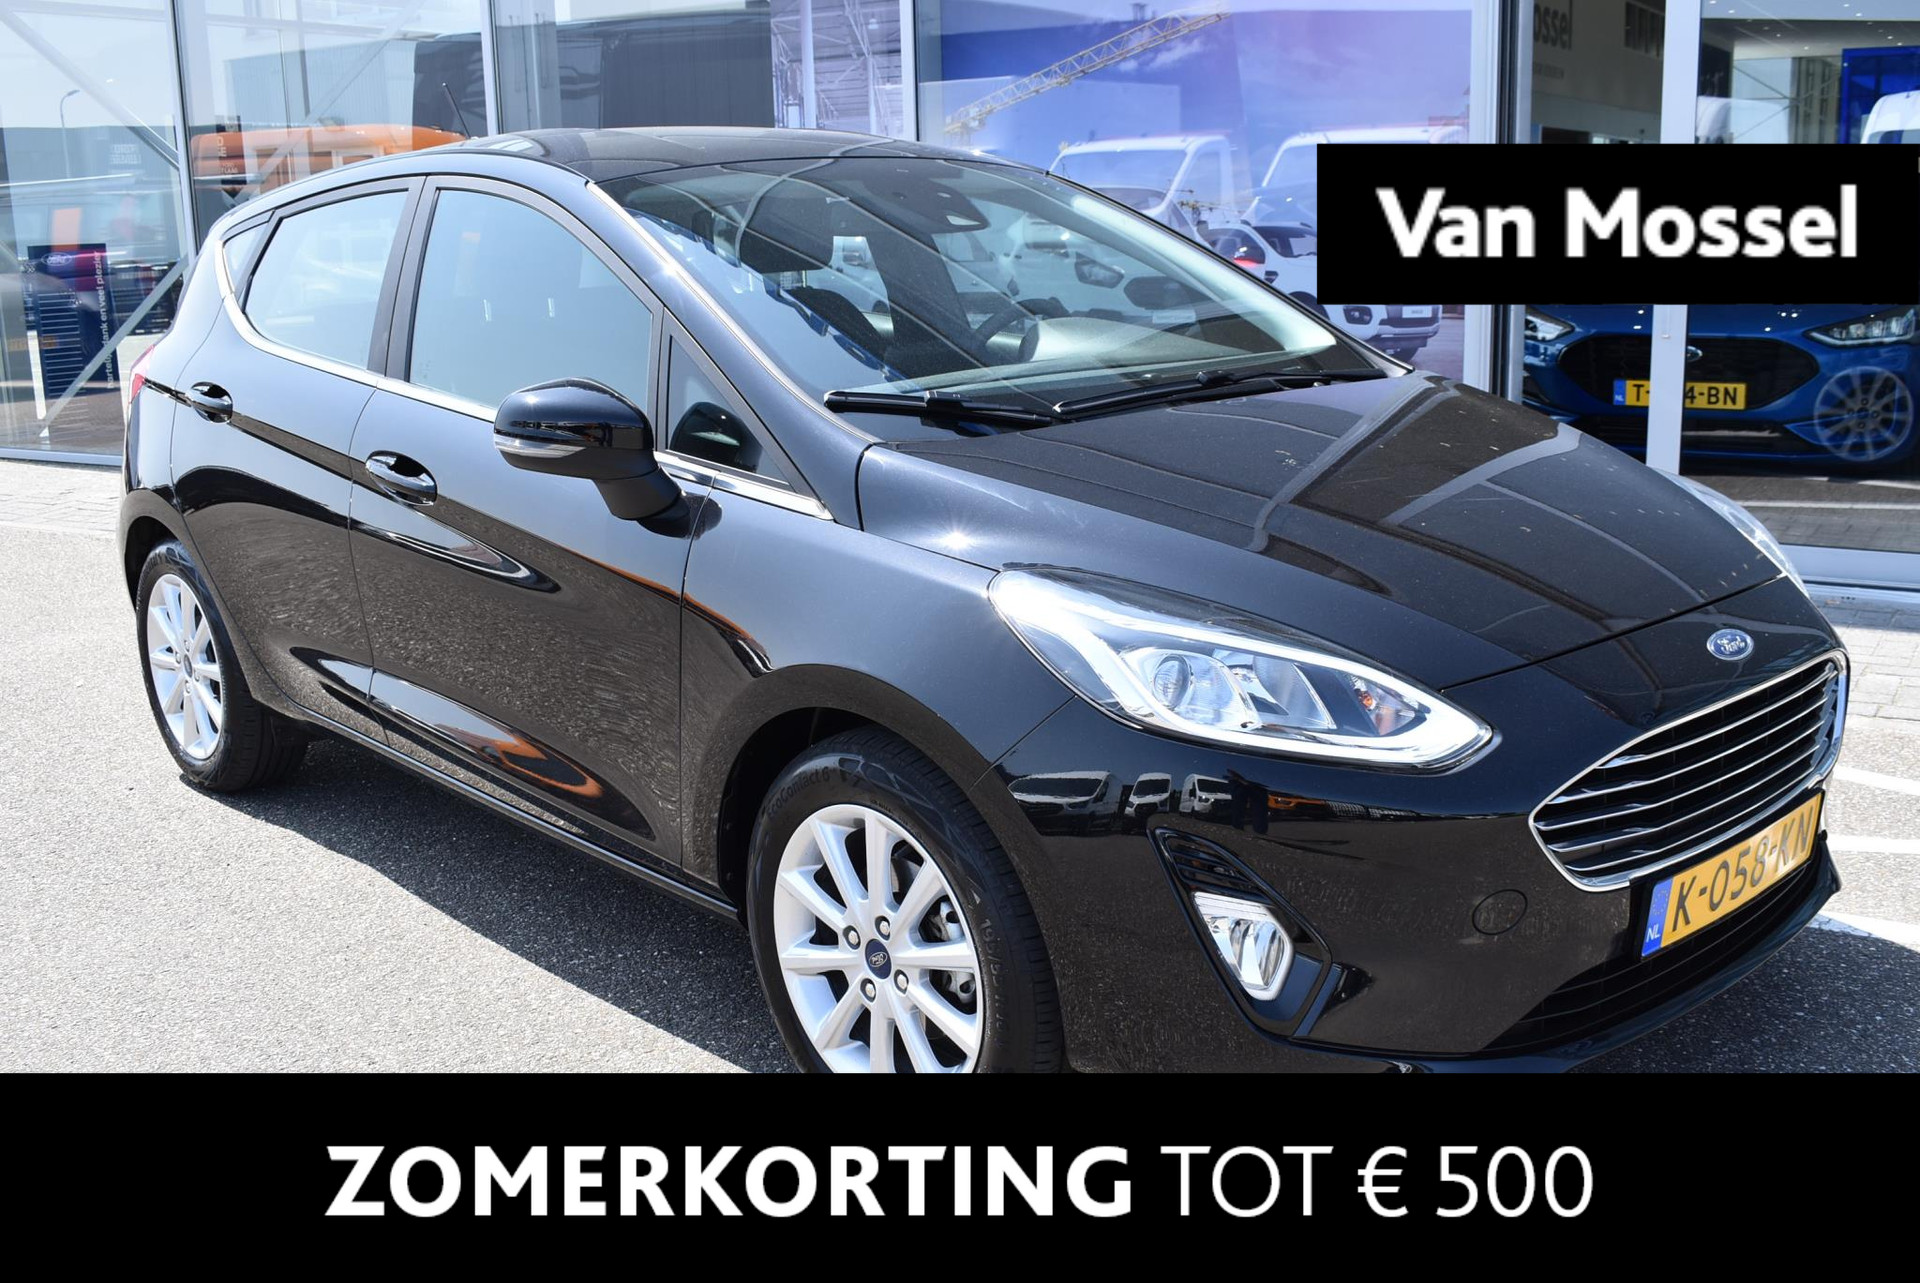 Ford Fiesta 1.0 EcoBoost Titanium | Navi | Winter Pack | Cruise Control | Bluetooth | Climate Control | PDC bij viaBOVAG.nl